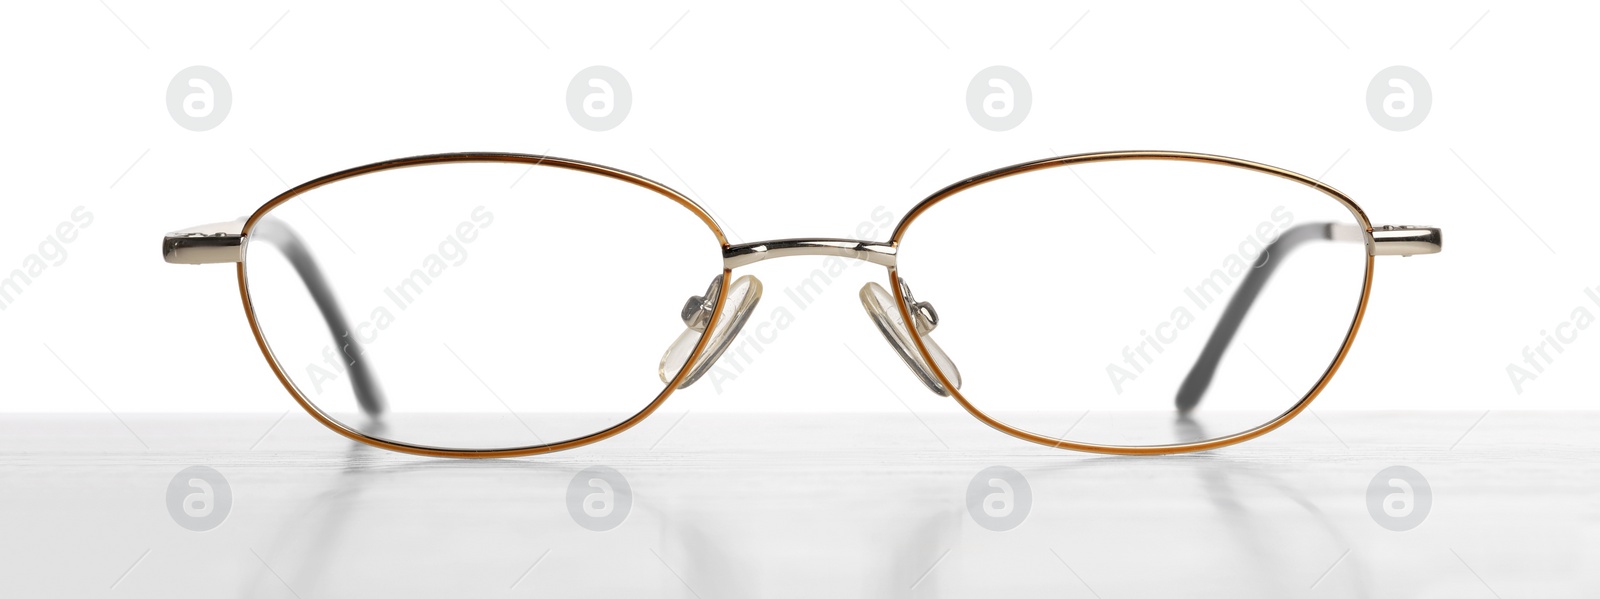 Photo of Stylish glasses with metal frame on table against white background